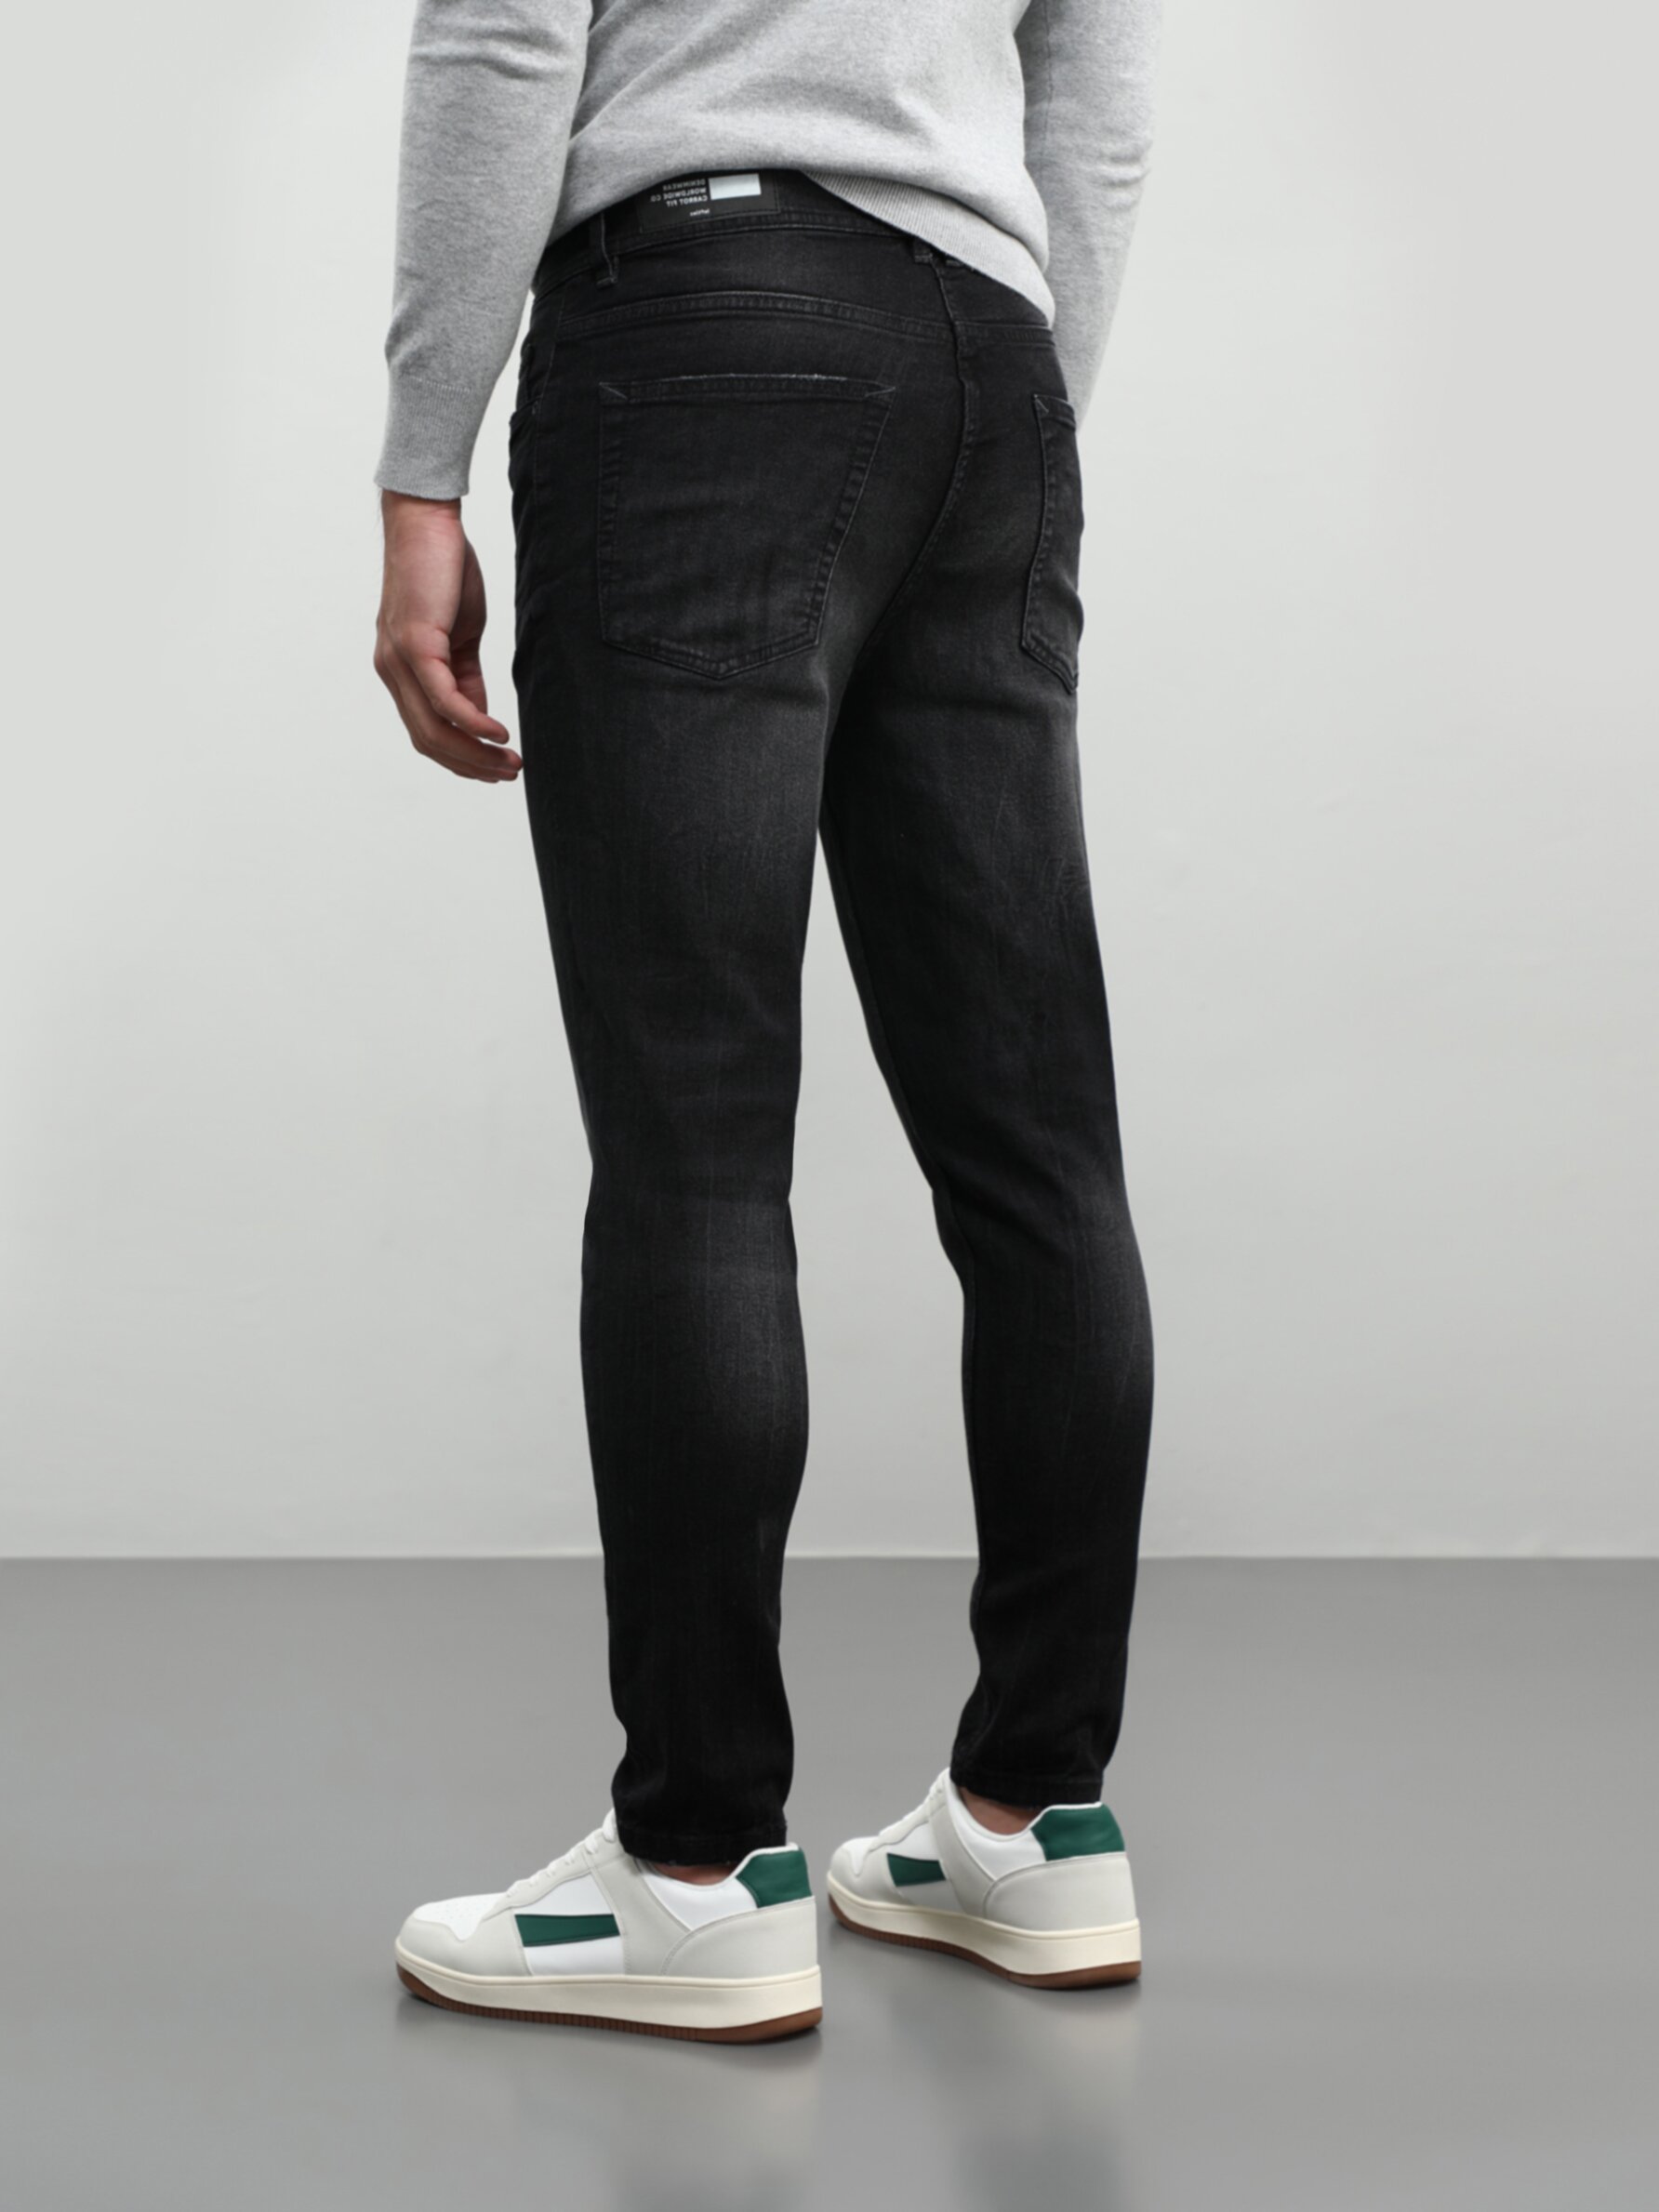 Order AMI PARIS Carrot Fit Trousers Black Pants from solebox | MBCY